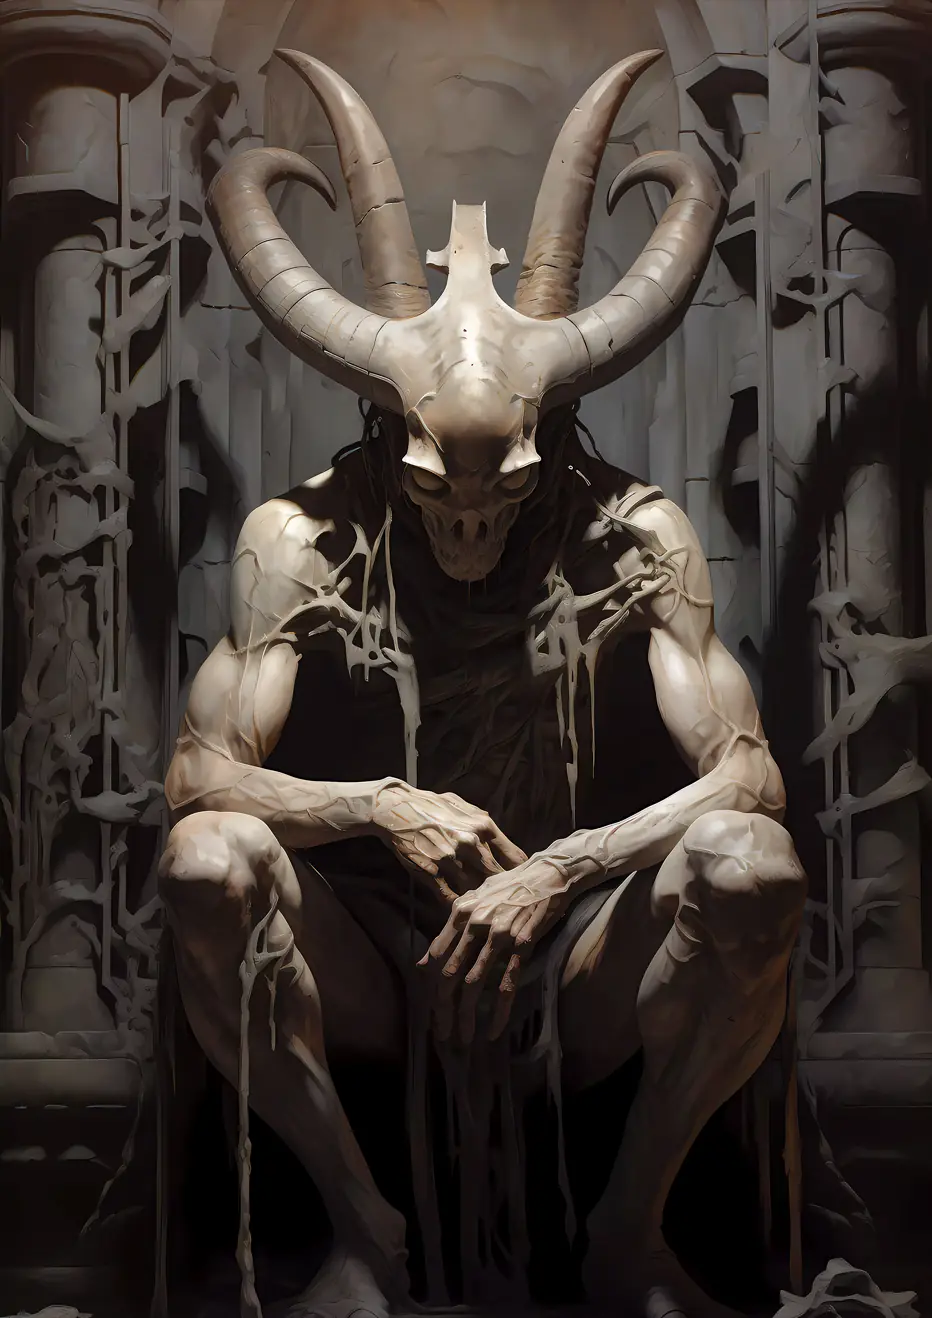 A minotaur sits amidst ancient ruins in "Horns of the Labyrinth's Curse."